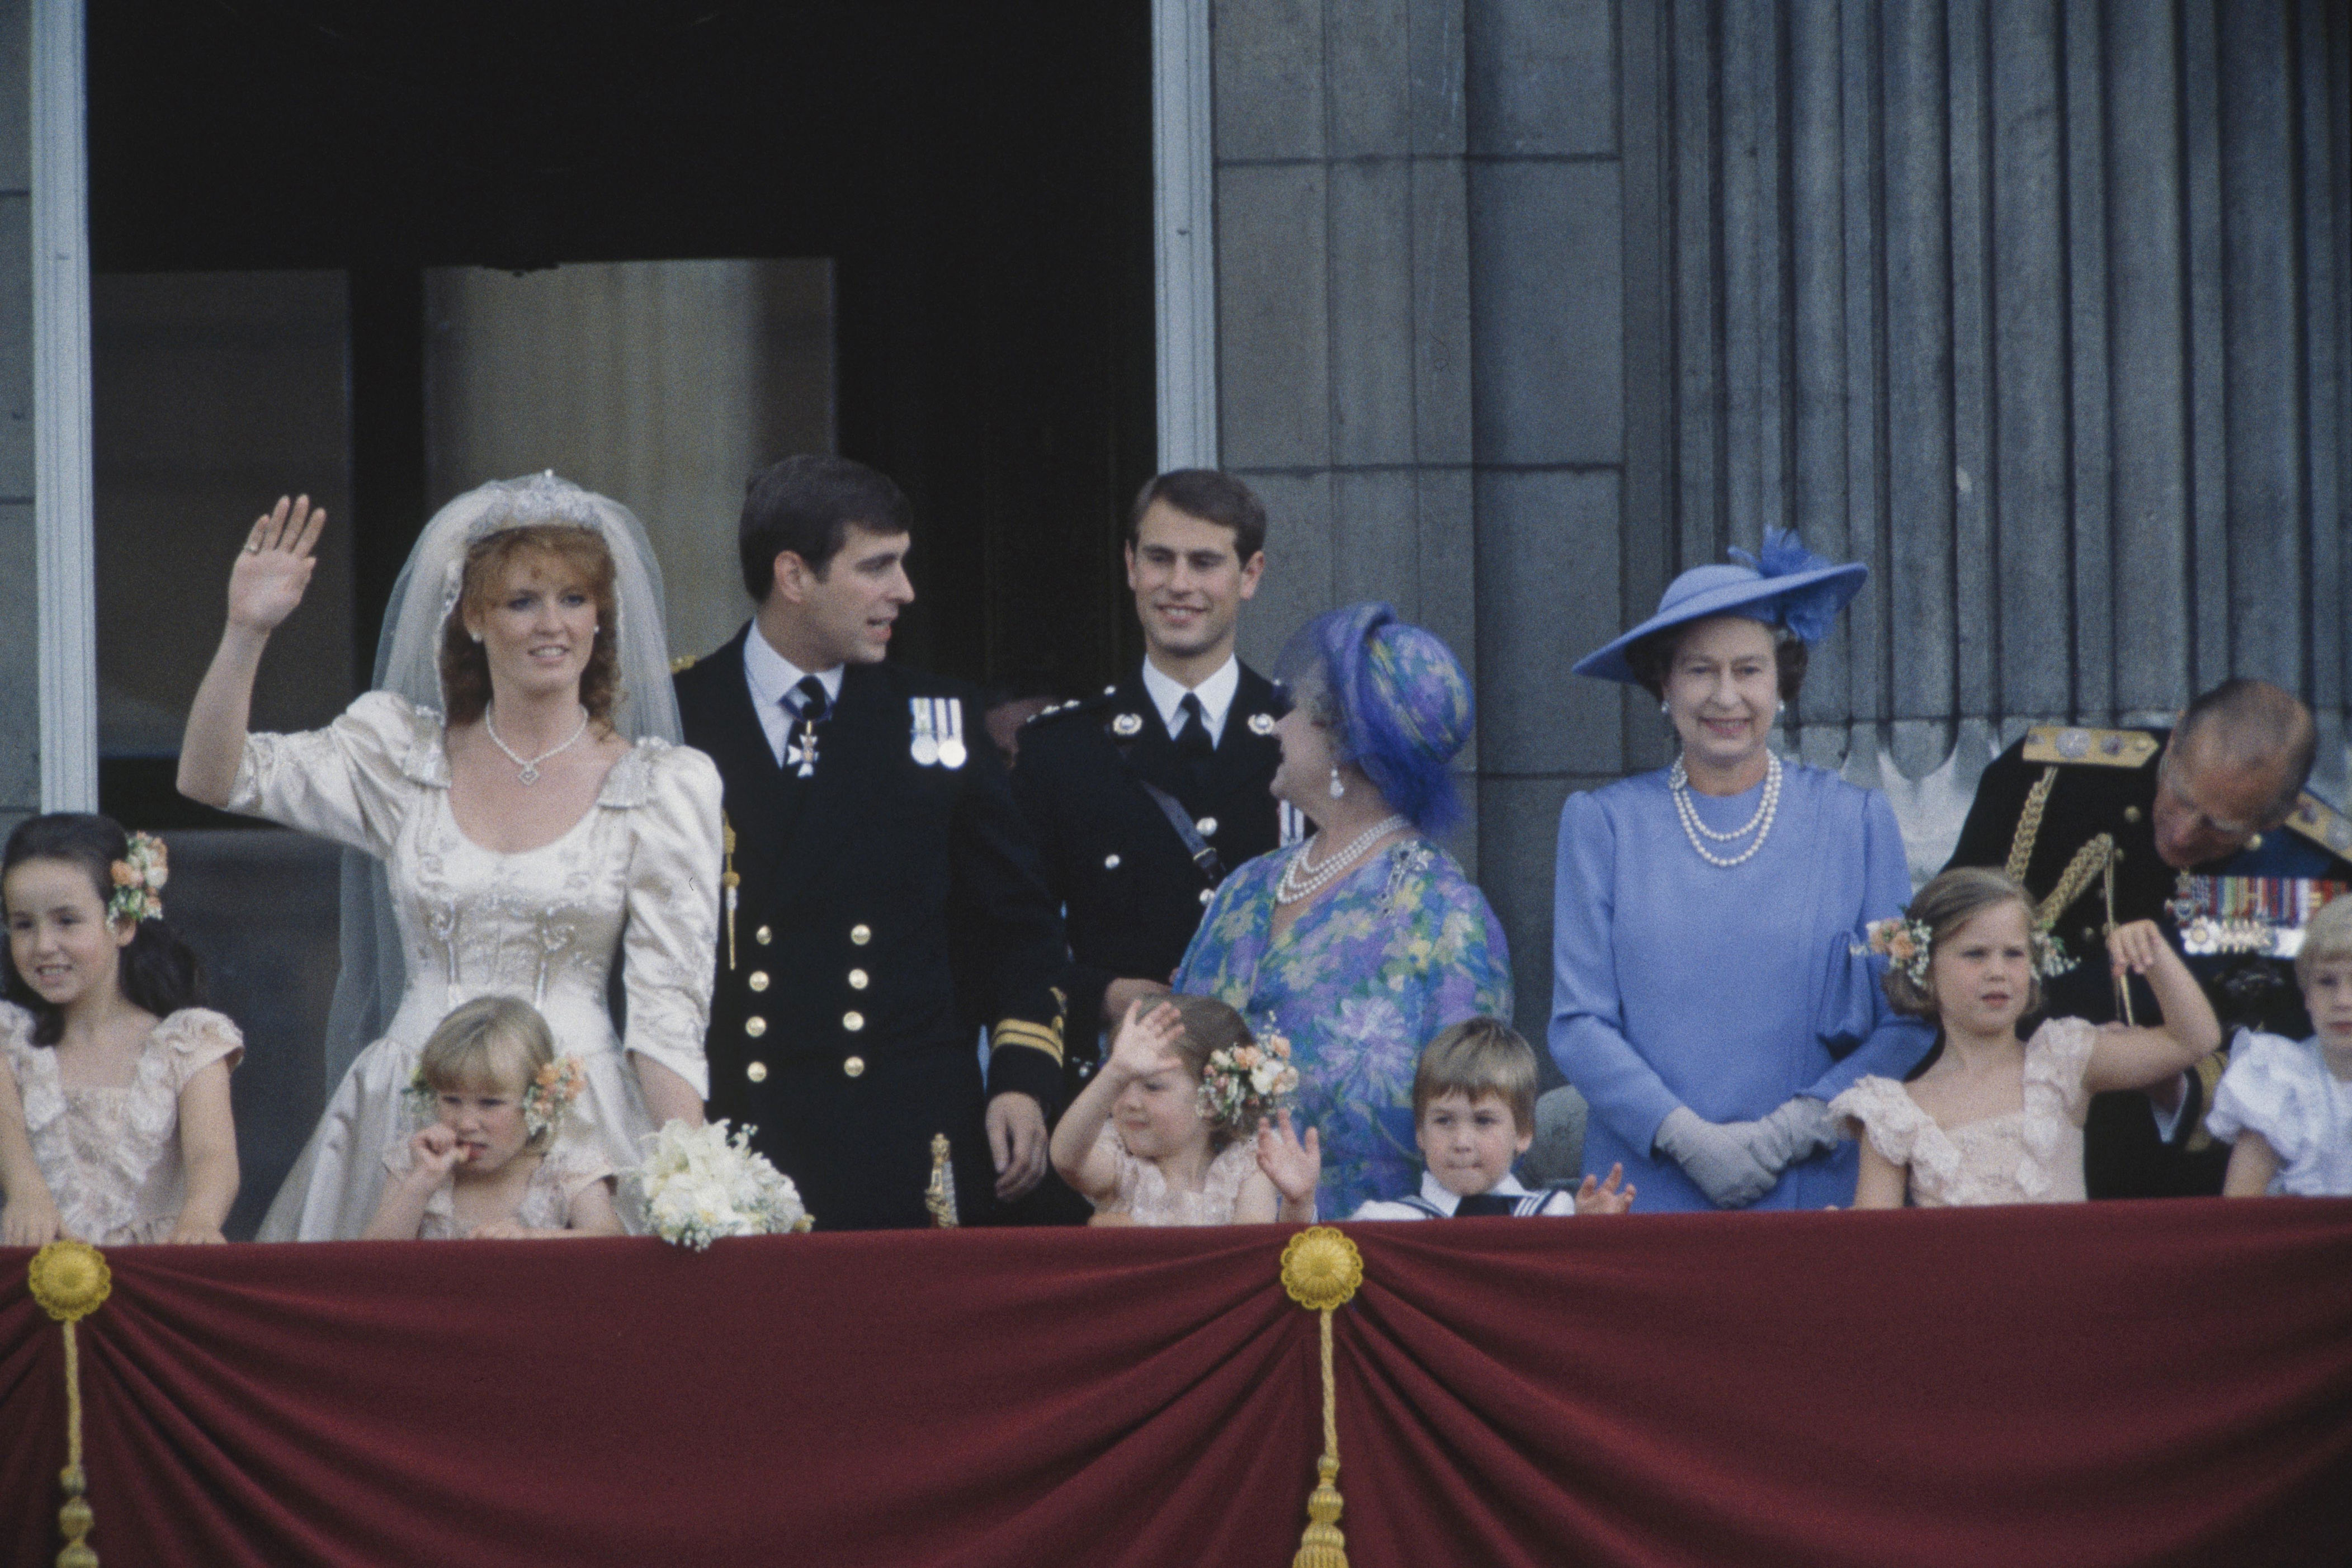 <p>Queen Elizabeth II was among the members of the British royal family who joined her second son, Prince Andrew, and his new bride, Sarah, Duchess of York, on the balcony at Buckingham Palace in London after the couple's wedding on July 23, 1986.</p>